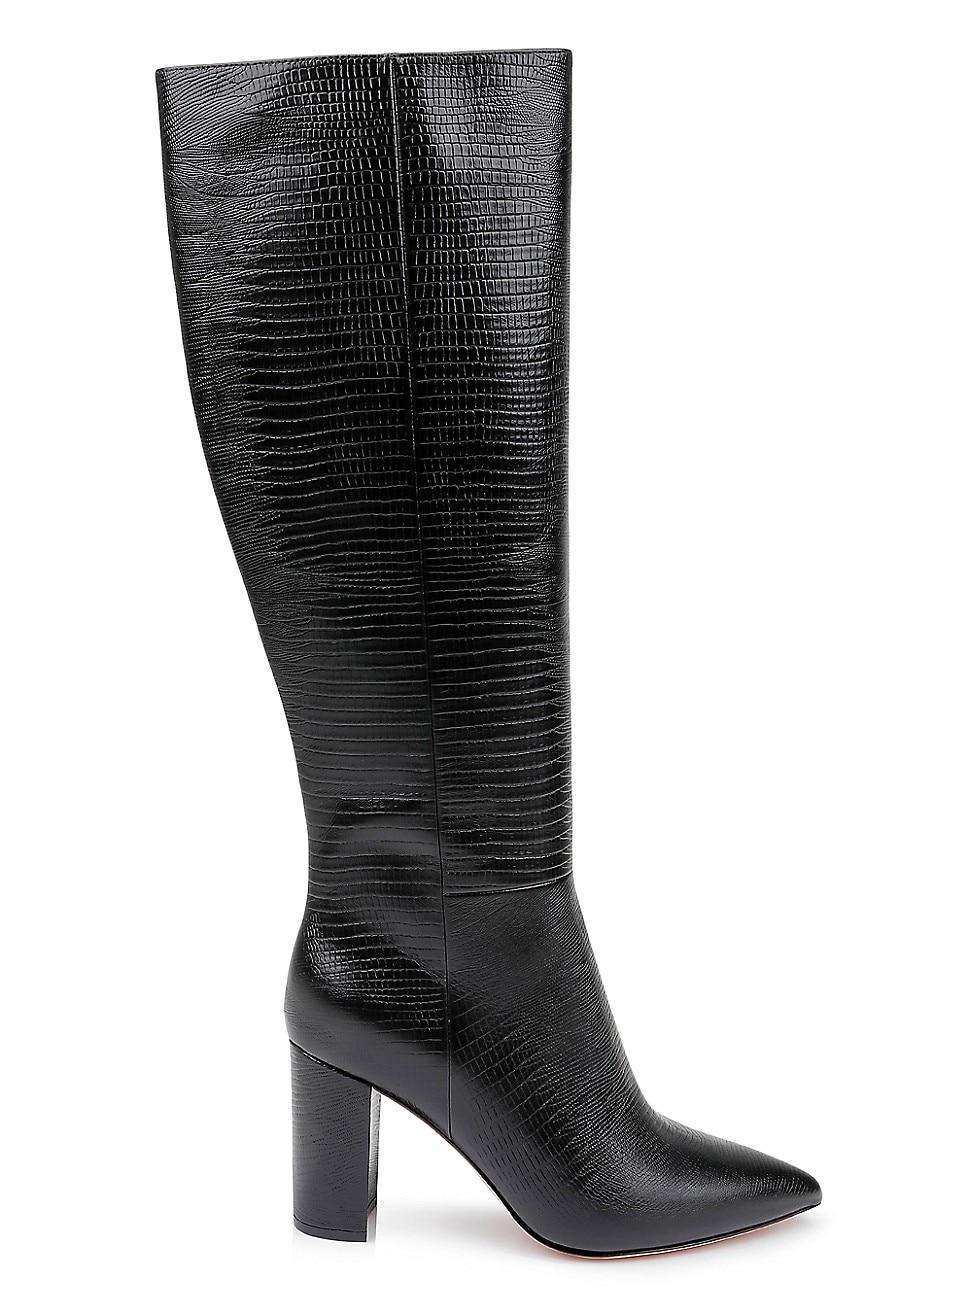 LAGENCE Christiane II Reptile Embossed Knee High Boot Product Image